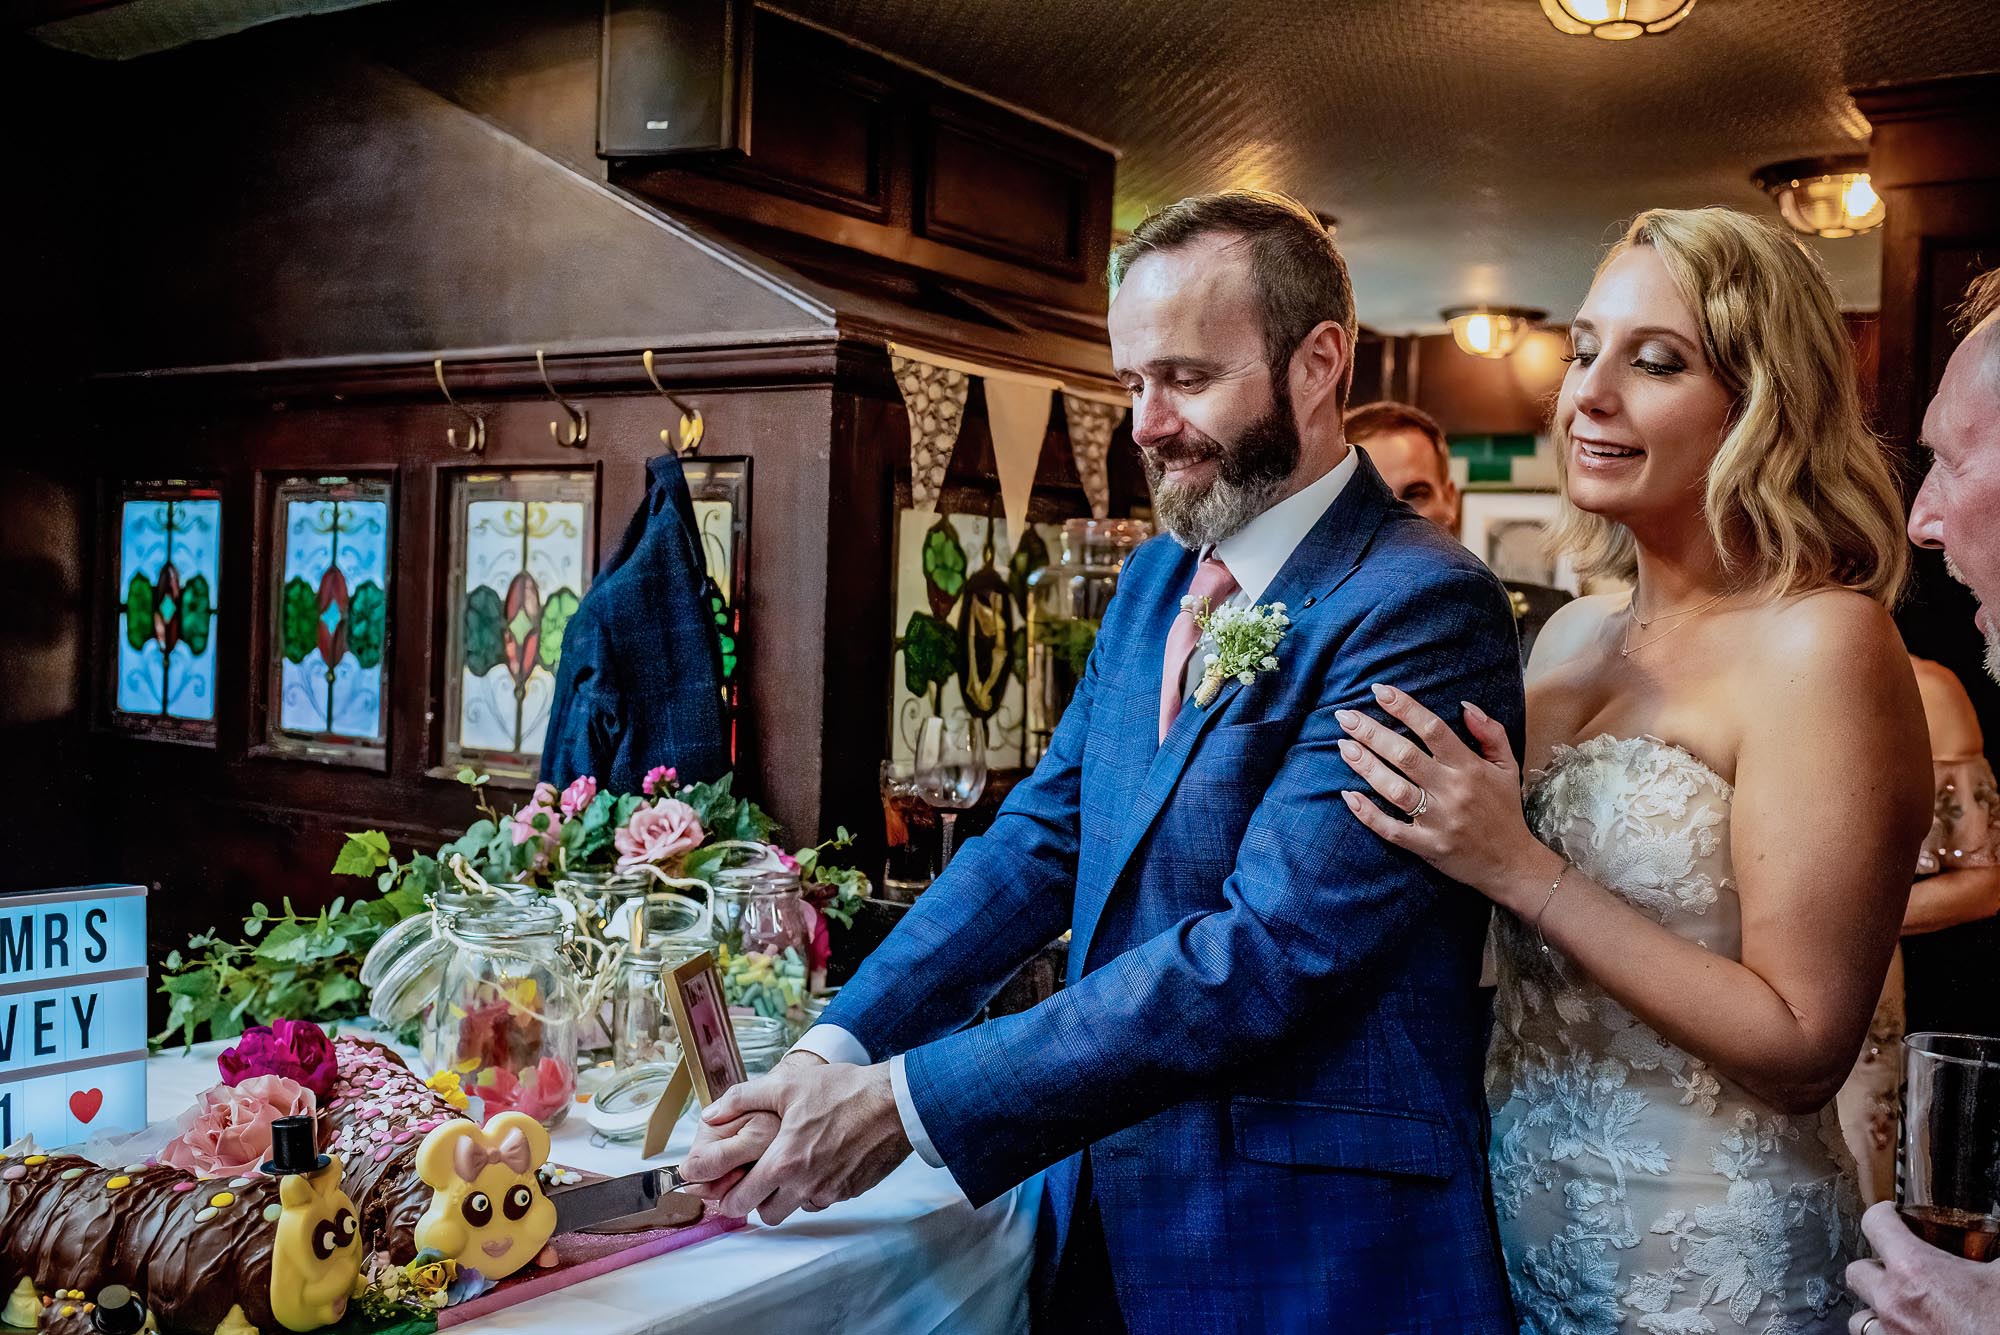 Chris and Sarah's London wedding with vibrant pink florals made by the bride. Photographer credit Damien Vickers Photography